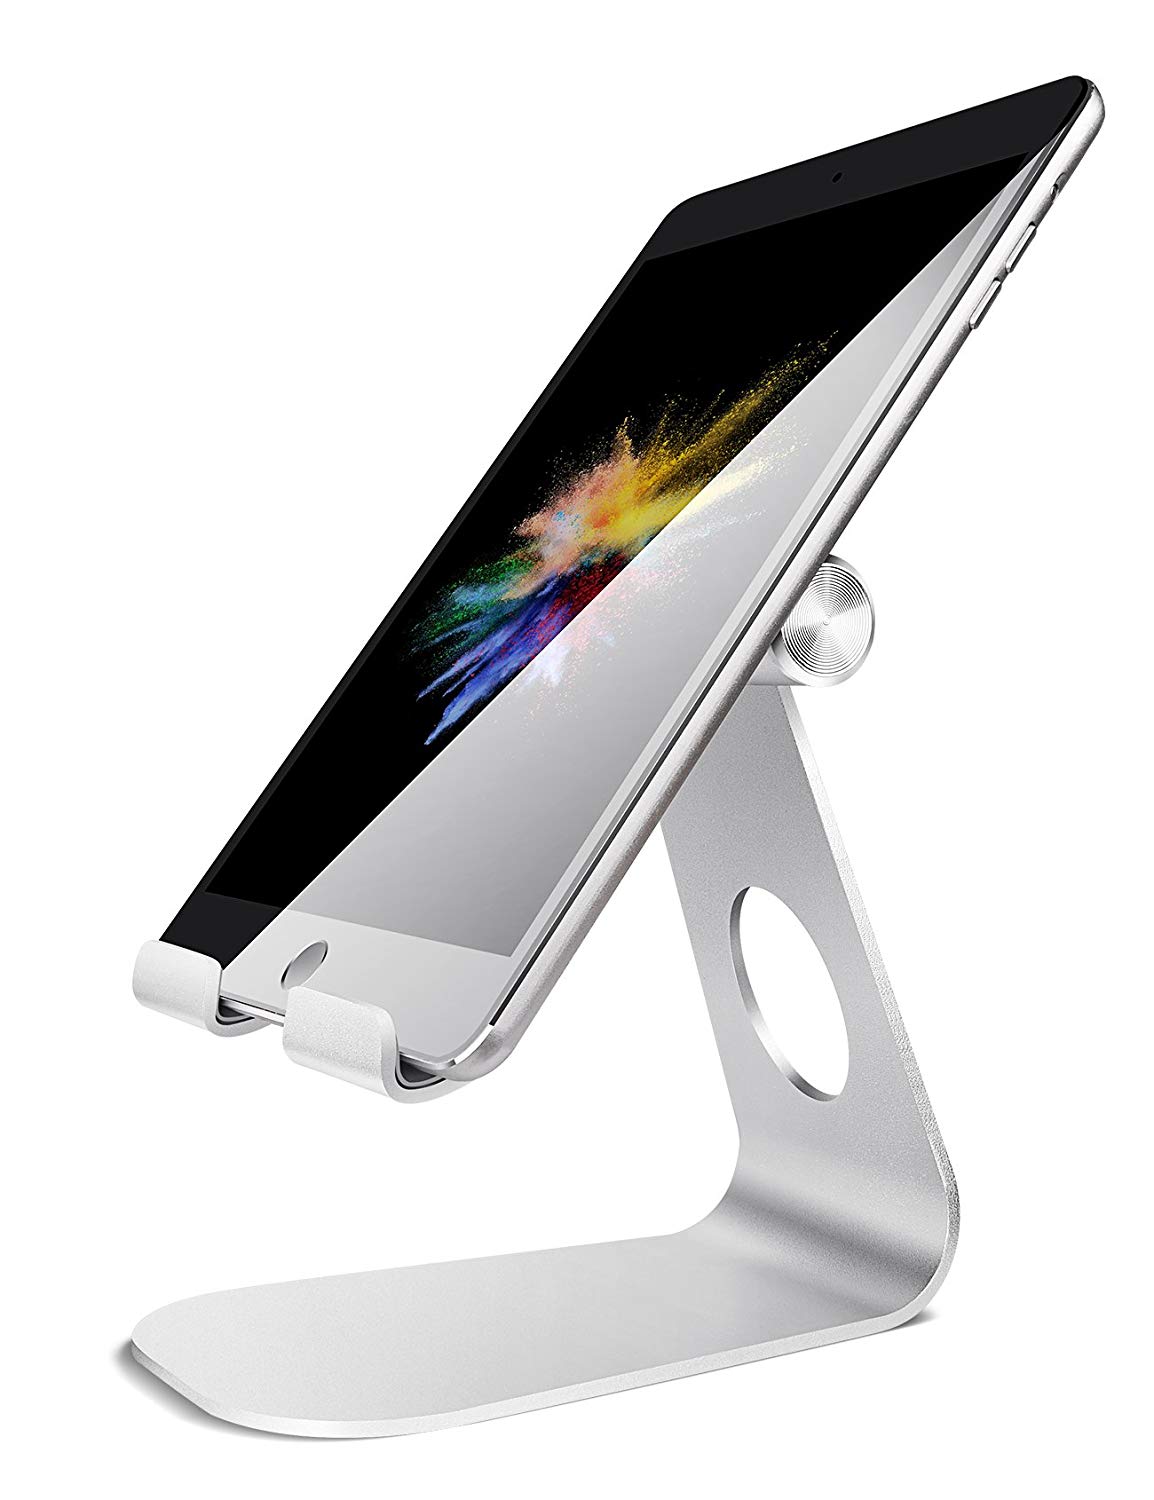 Lamicall tablet stand.